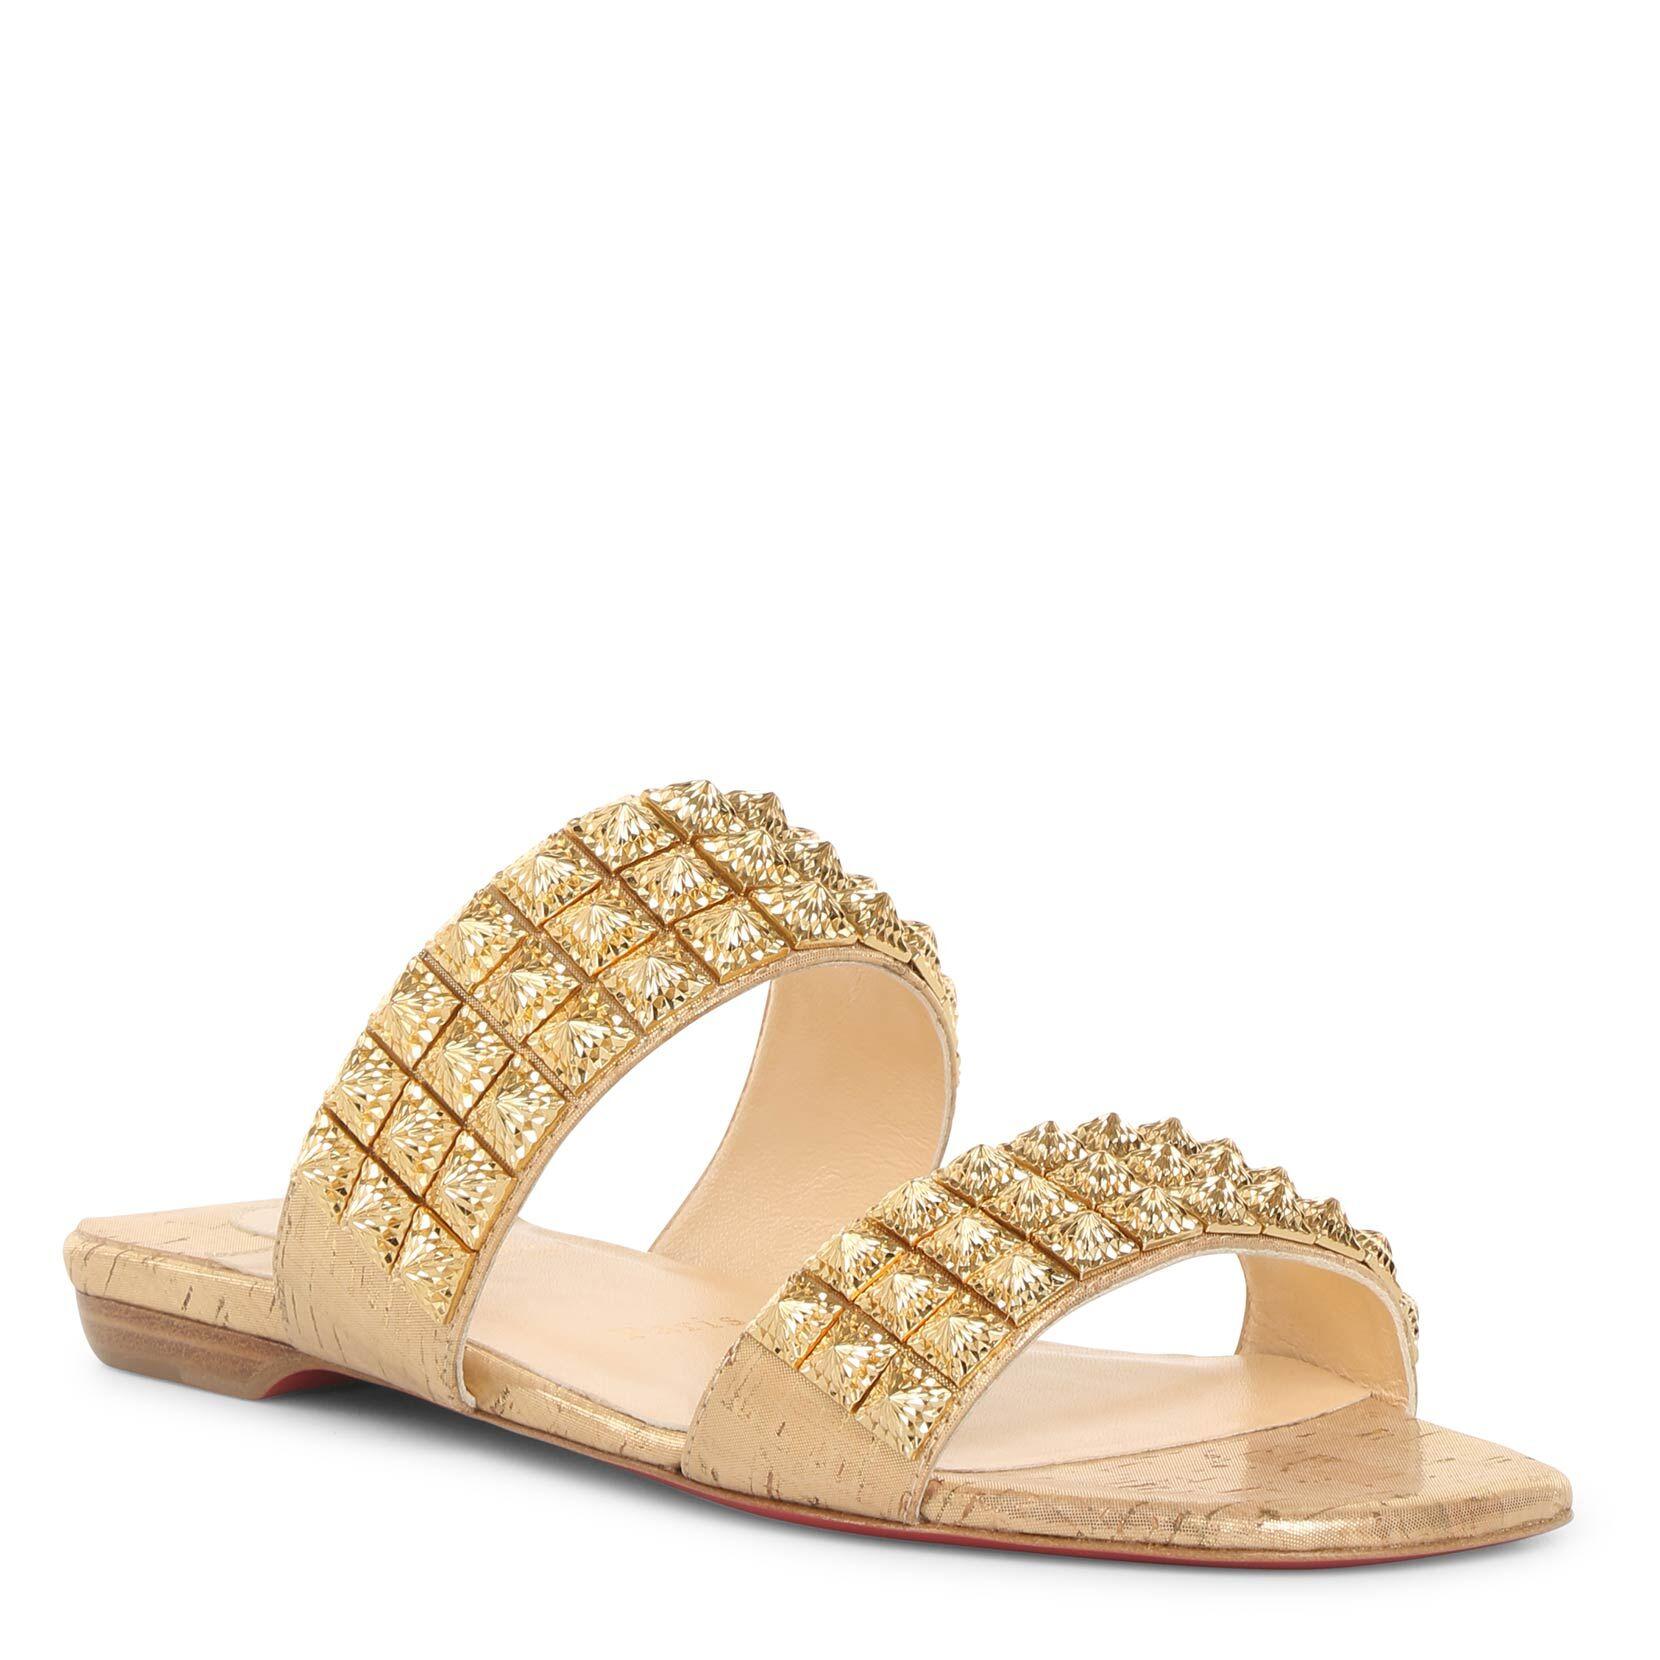 Christian Louboutin Myriadiam Spiked Lamé-coated Cork Sandals in Gold